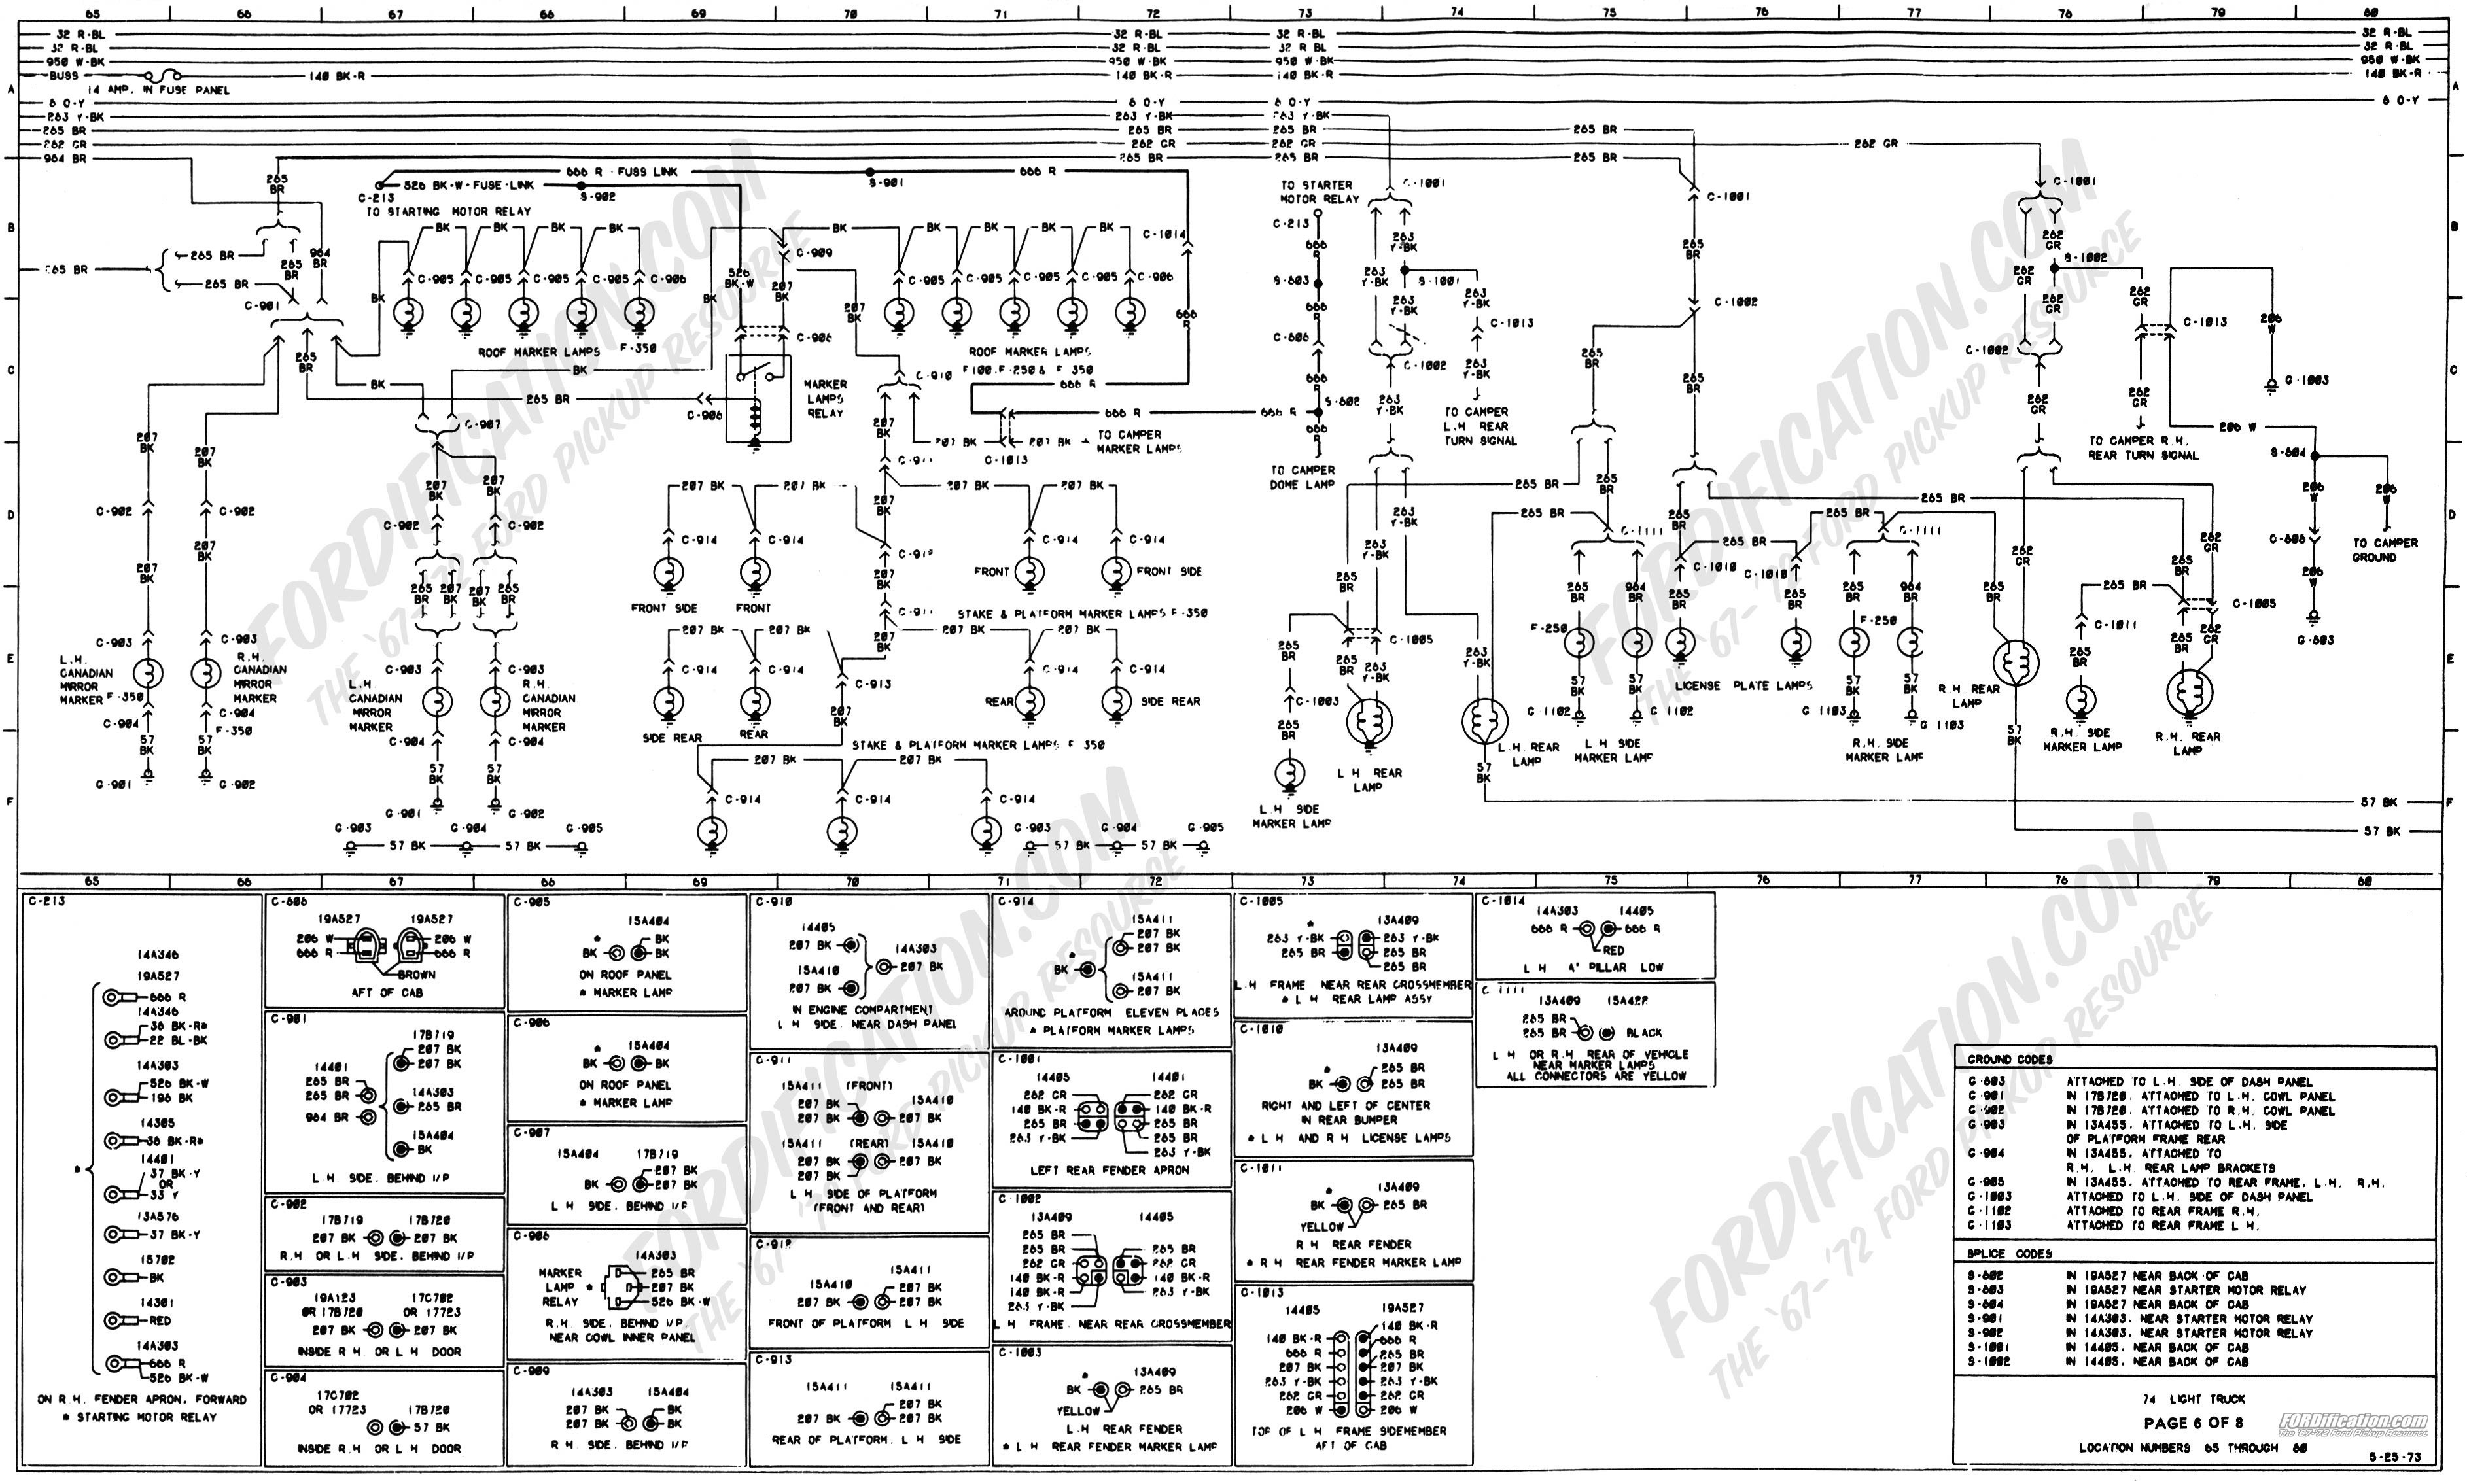 Cb550 Wiring Diagram Wiring 74master 6of8 1955 ford F100 Wiring Diagram 5 Of Cb550 Wiring Diagram